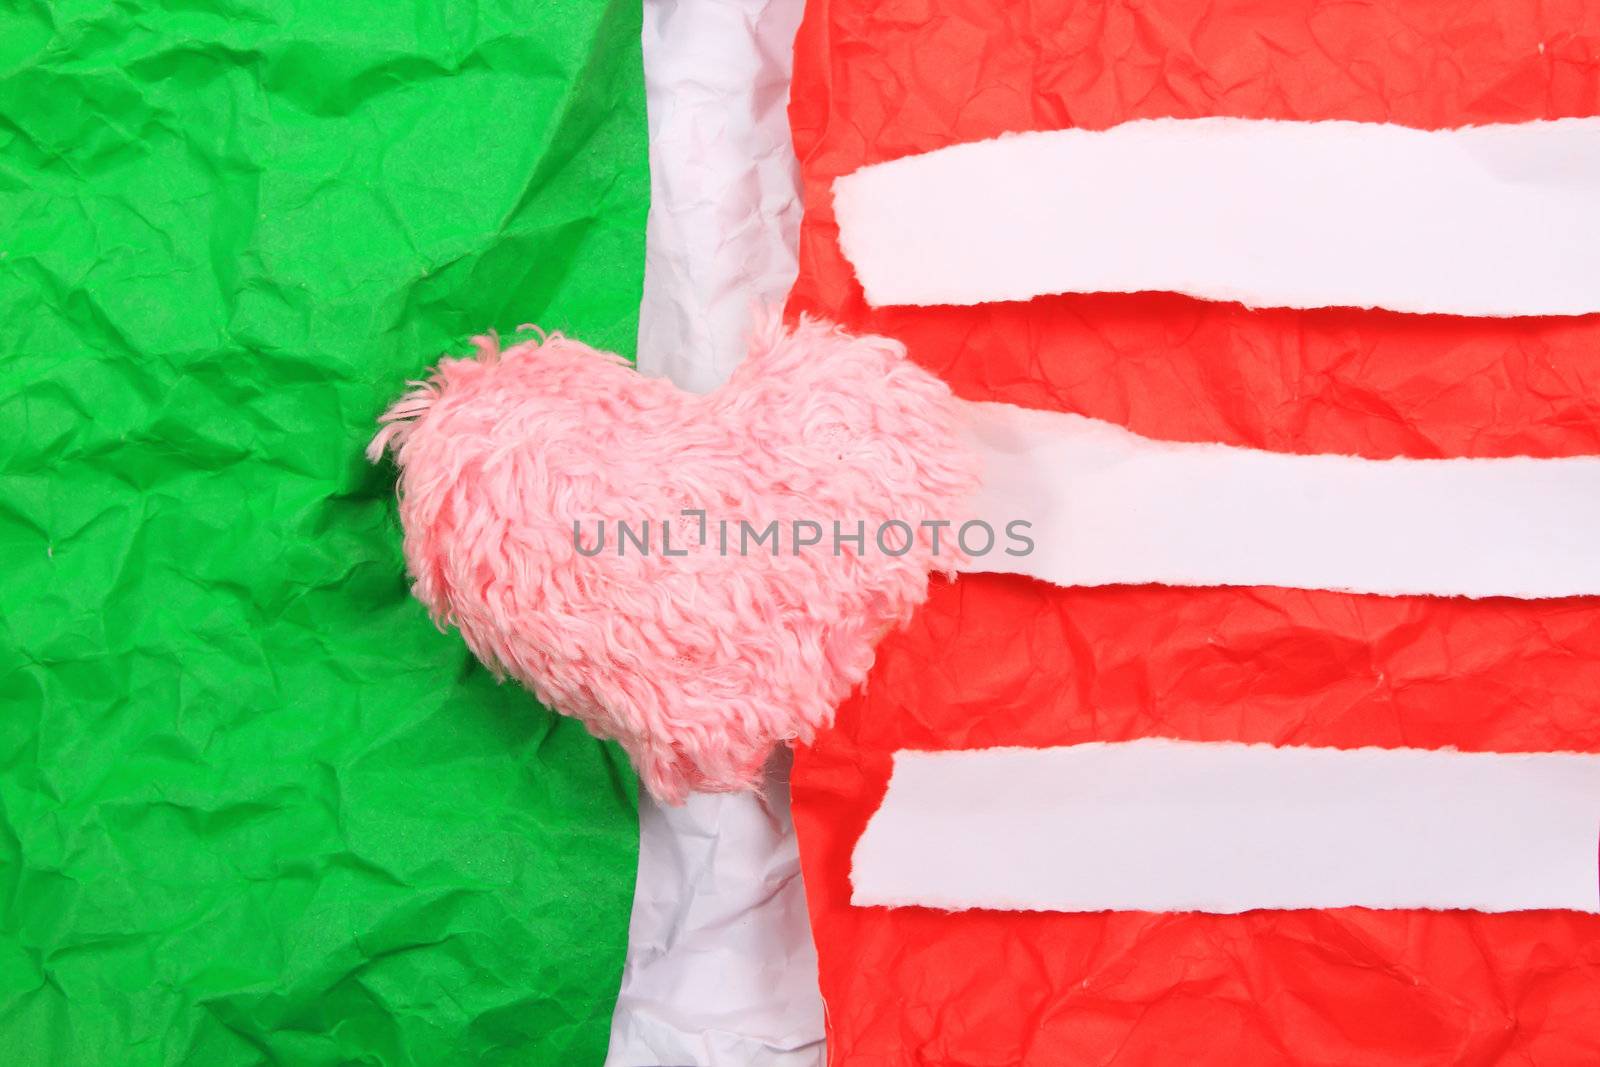 Creative simple background on Valentine' s Day  by rufous